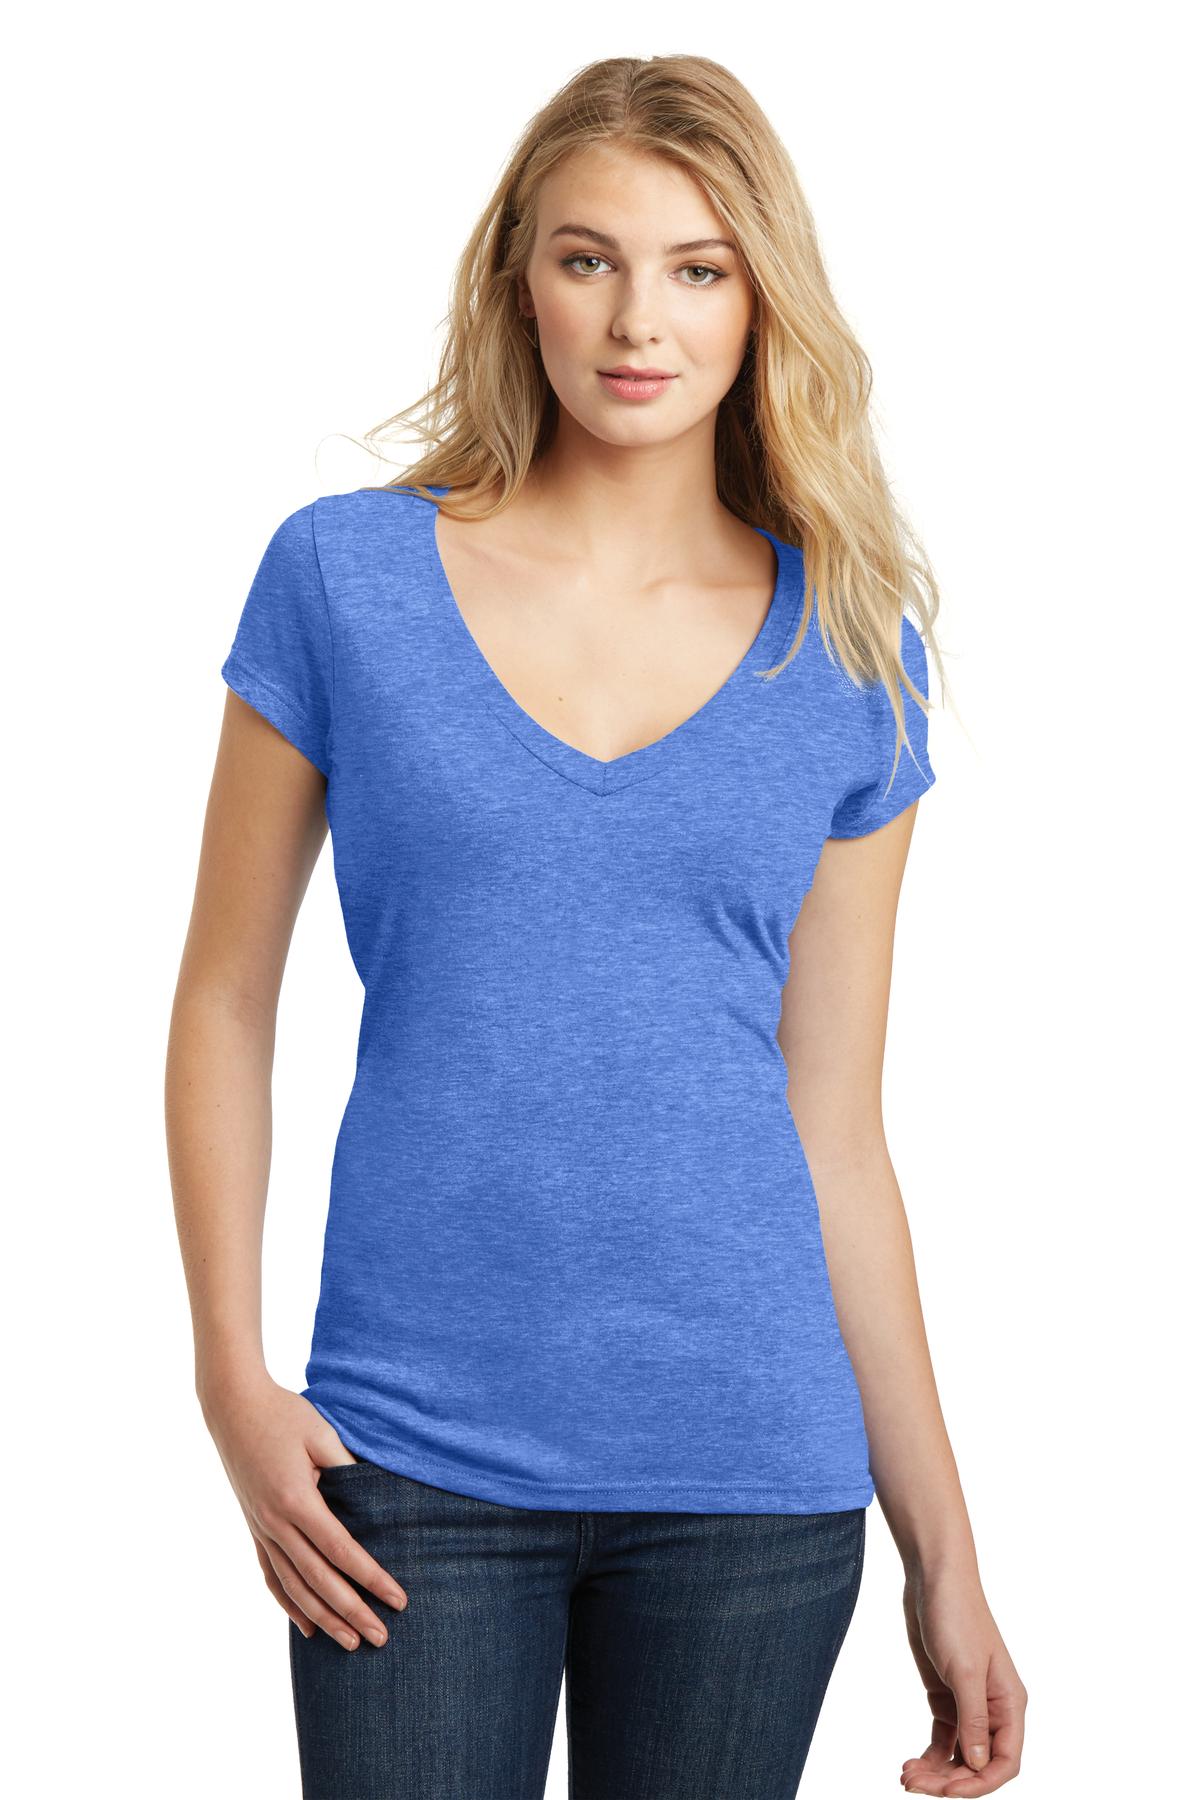 District  DT6502 - Juniors Very Important Tee  Deep V-Neck